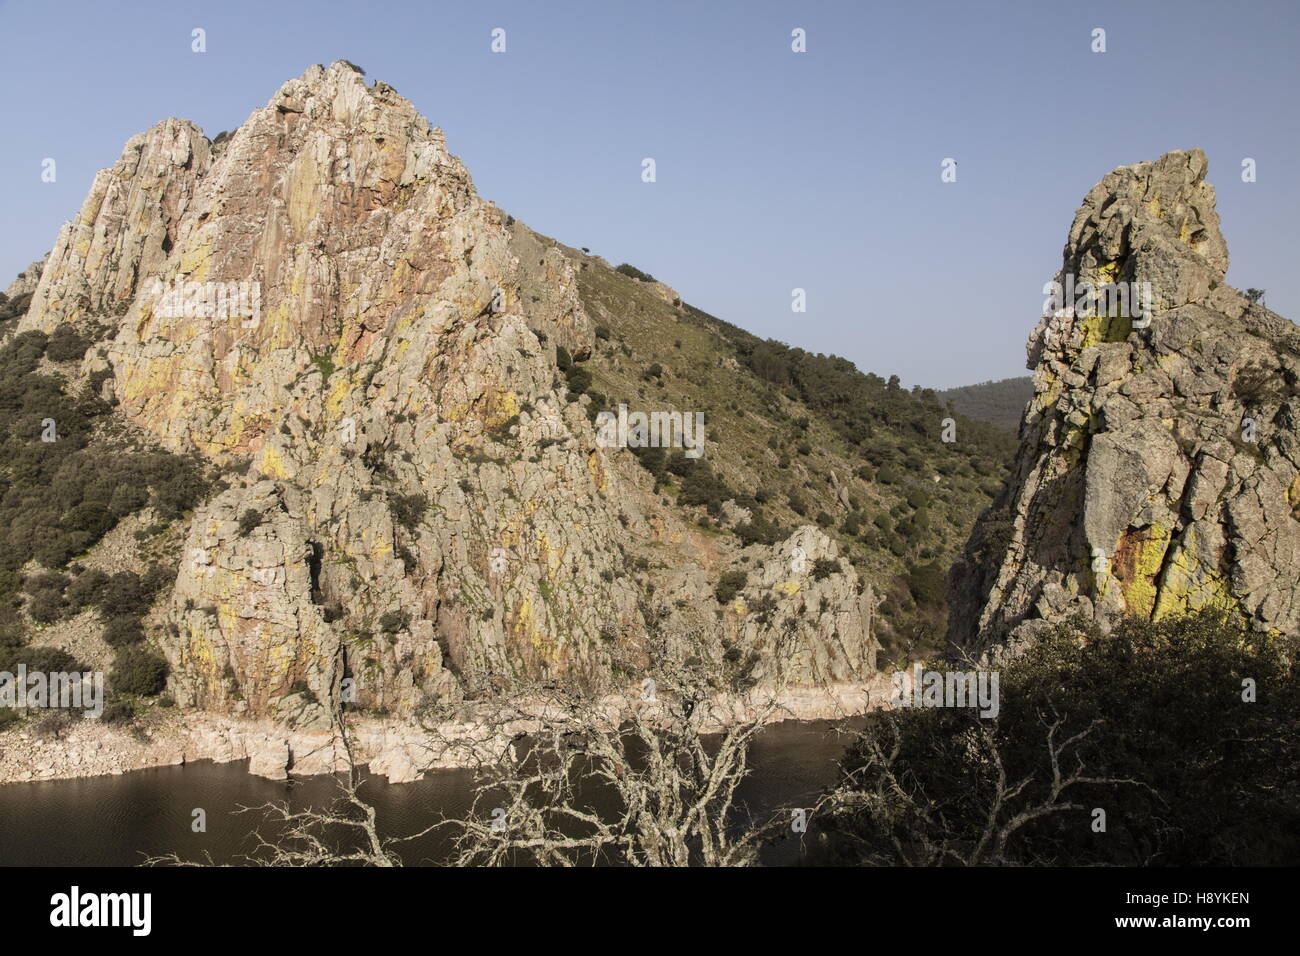 Penafalcon cliff, Monfrague Natural Park, Extremadura, Spain - major vulture, and other birds, breeding site. Stock Photo